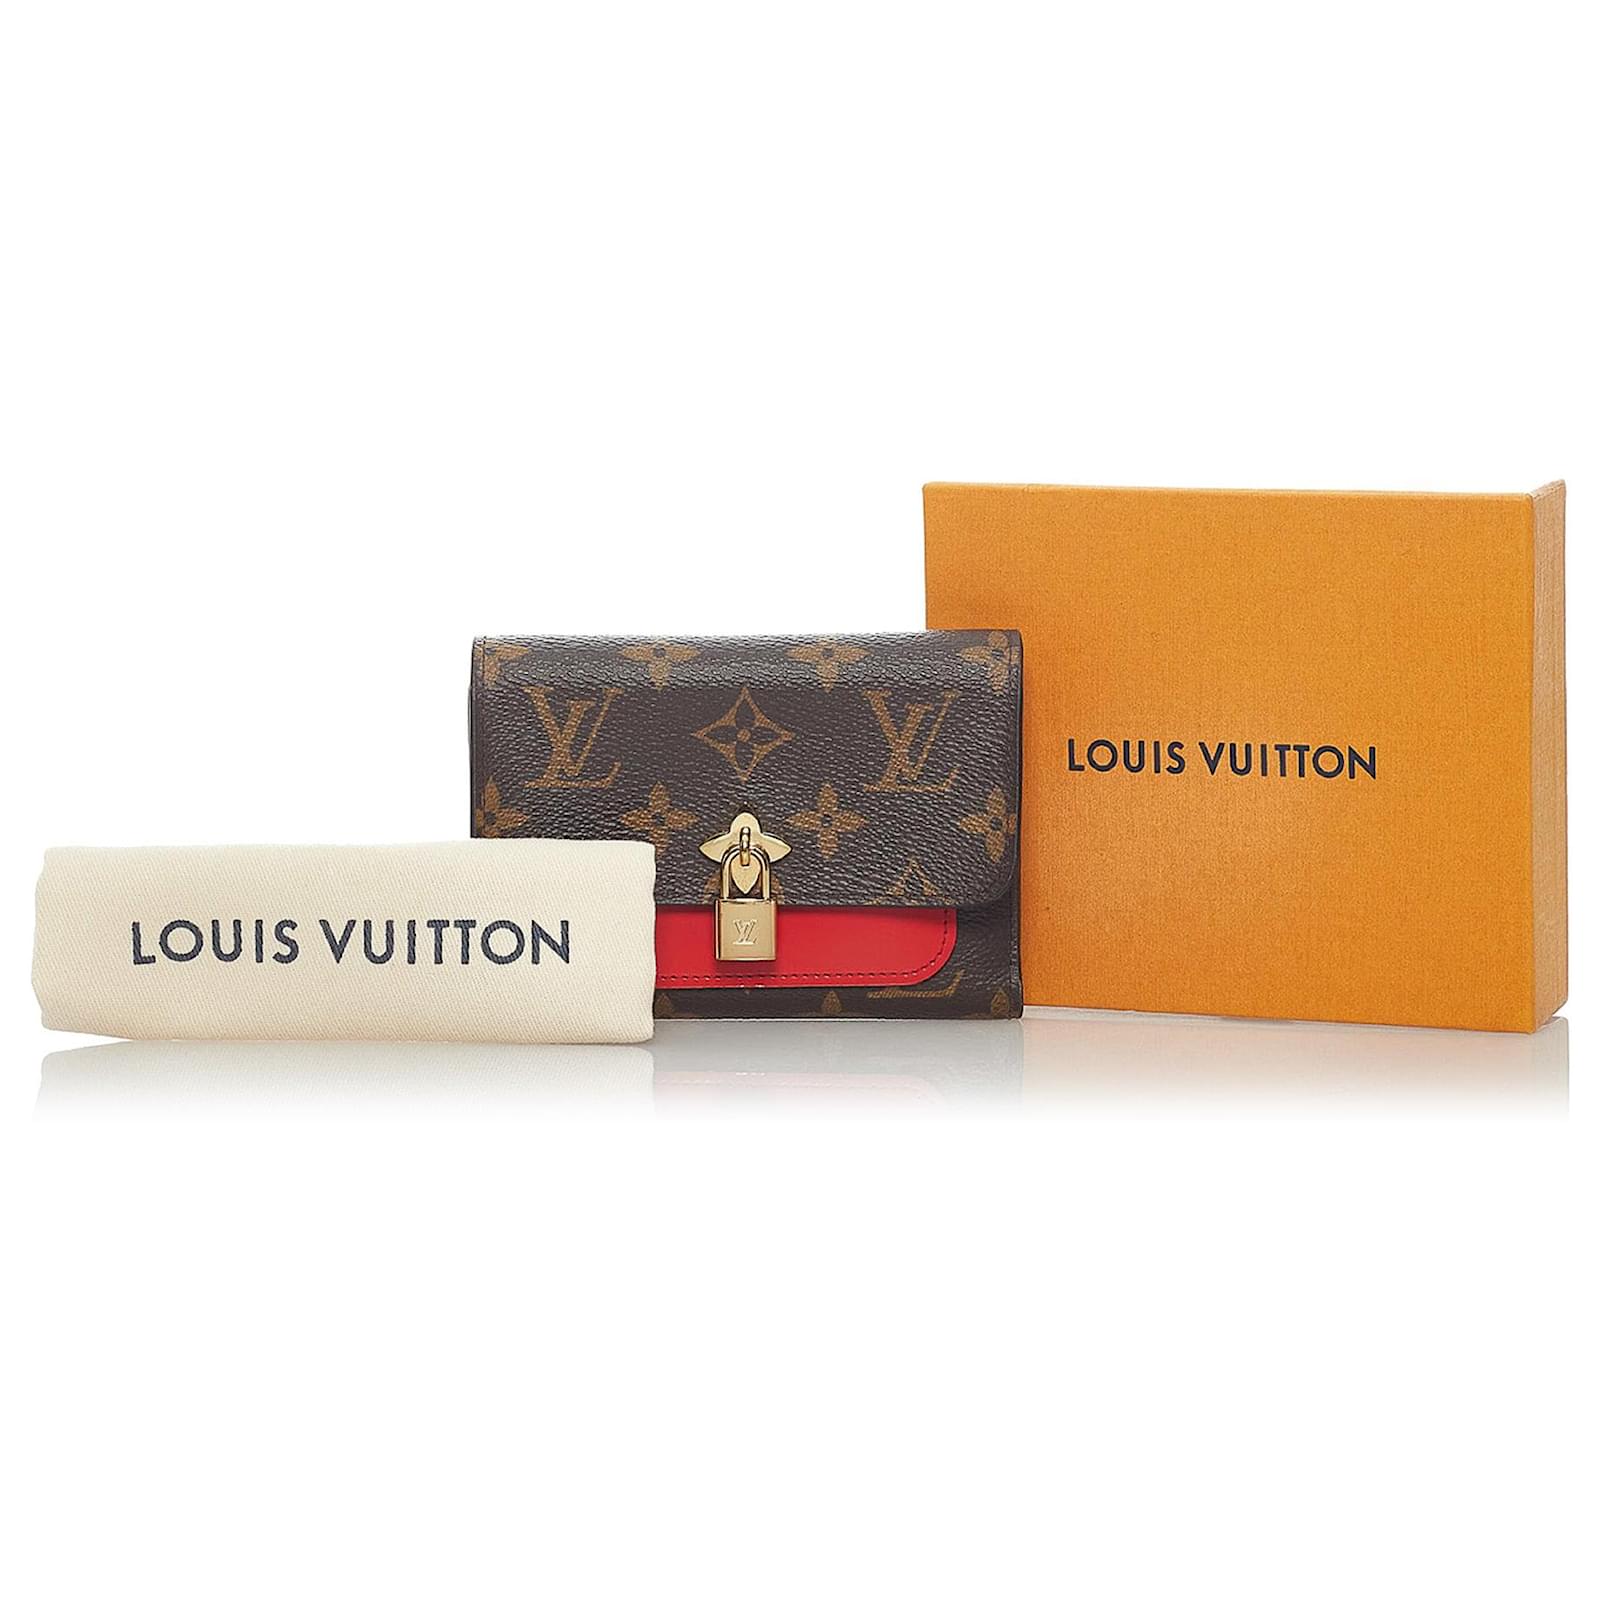 LV FLOWER COMPACT WALLET